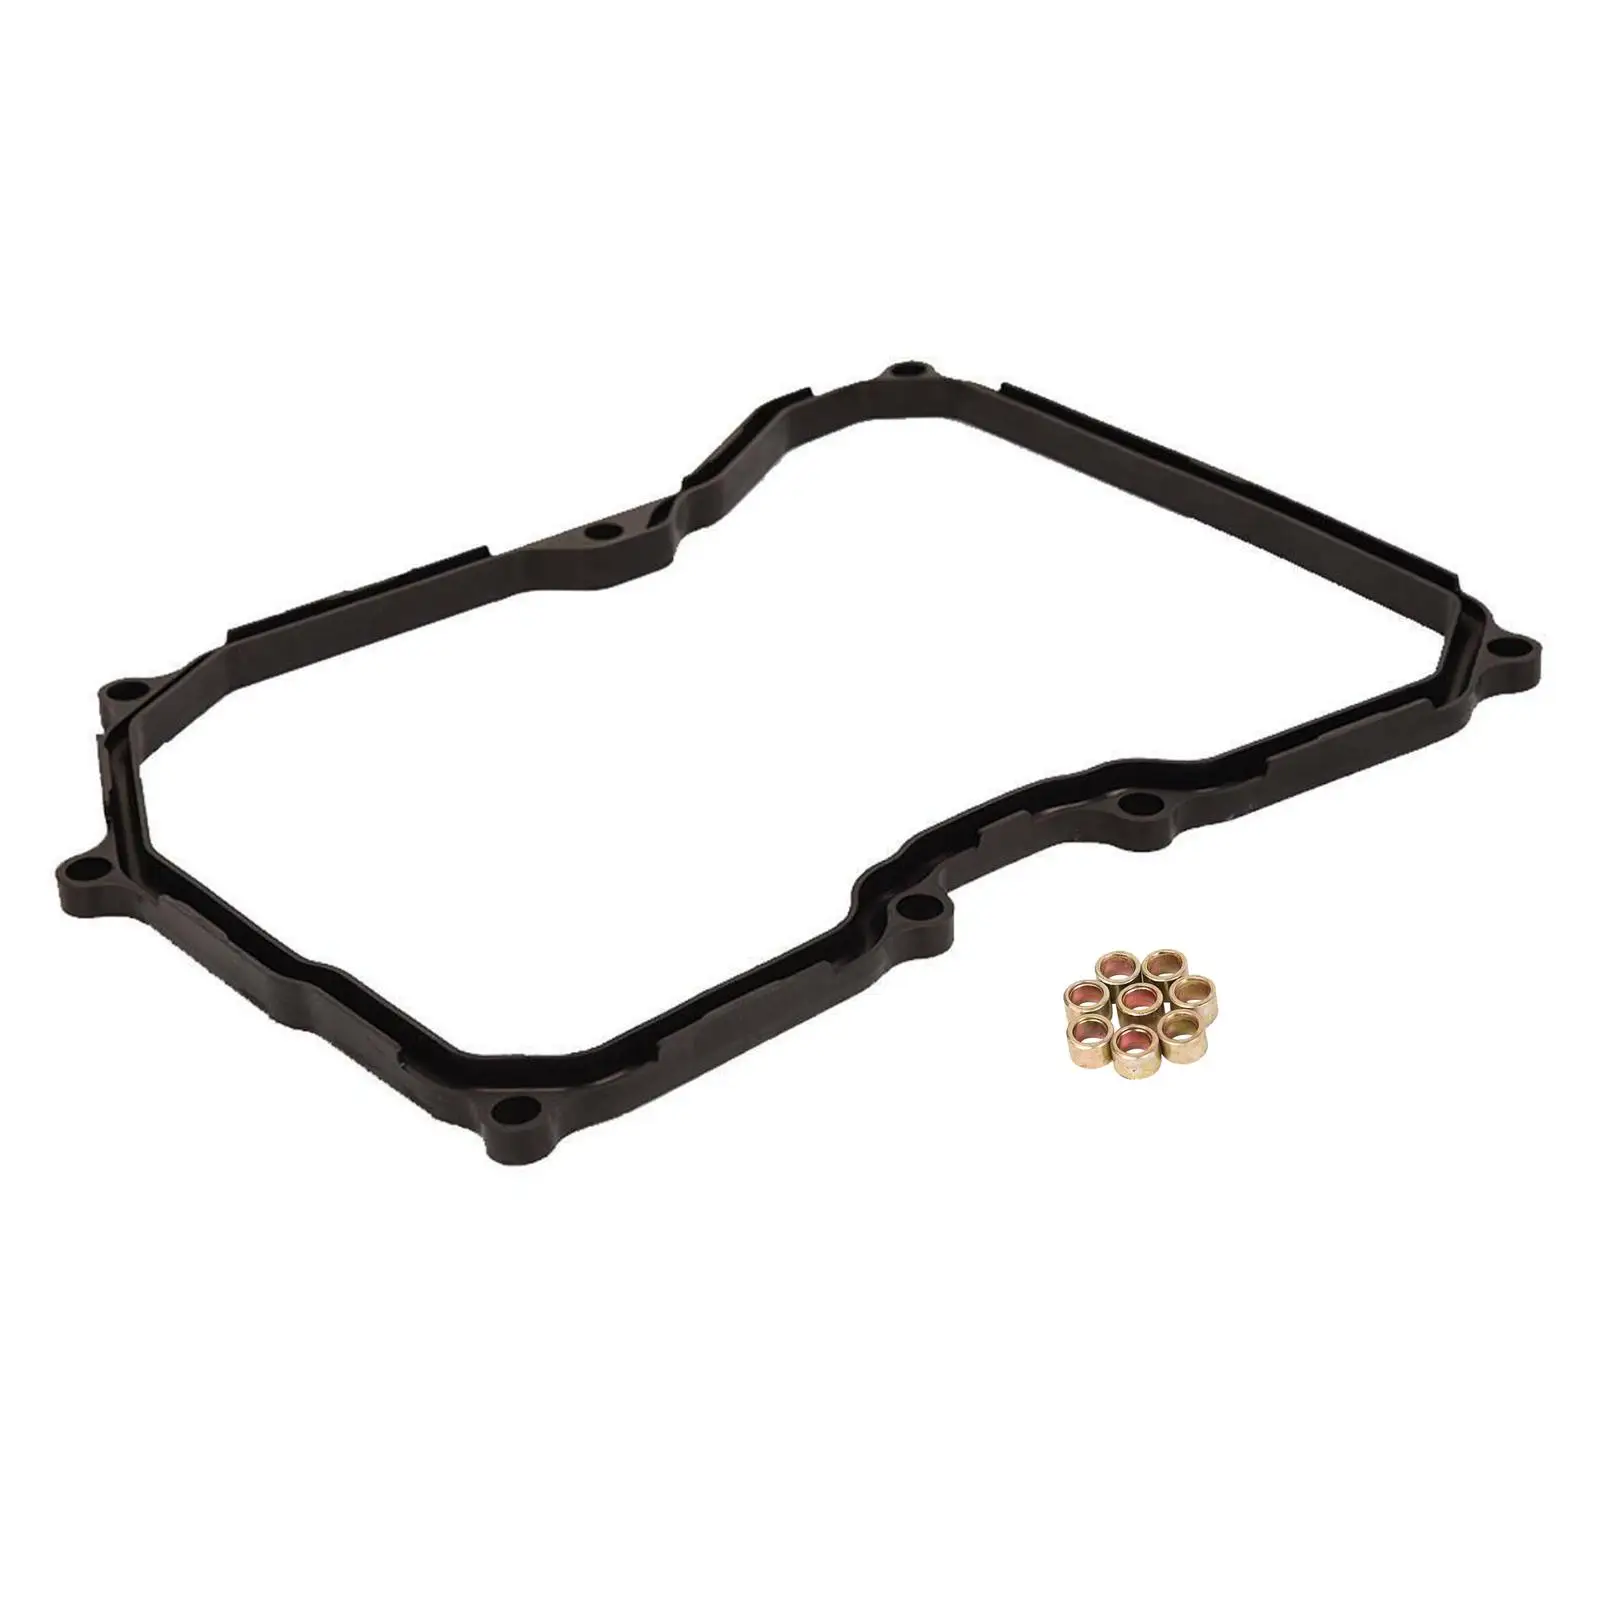 Transmission Pan Gasket Lightweight 24117566356 Fits for Mini Accessories